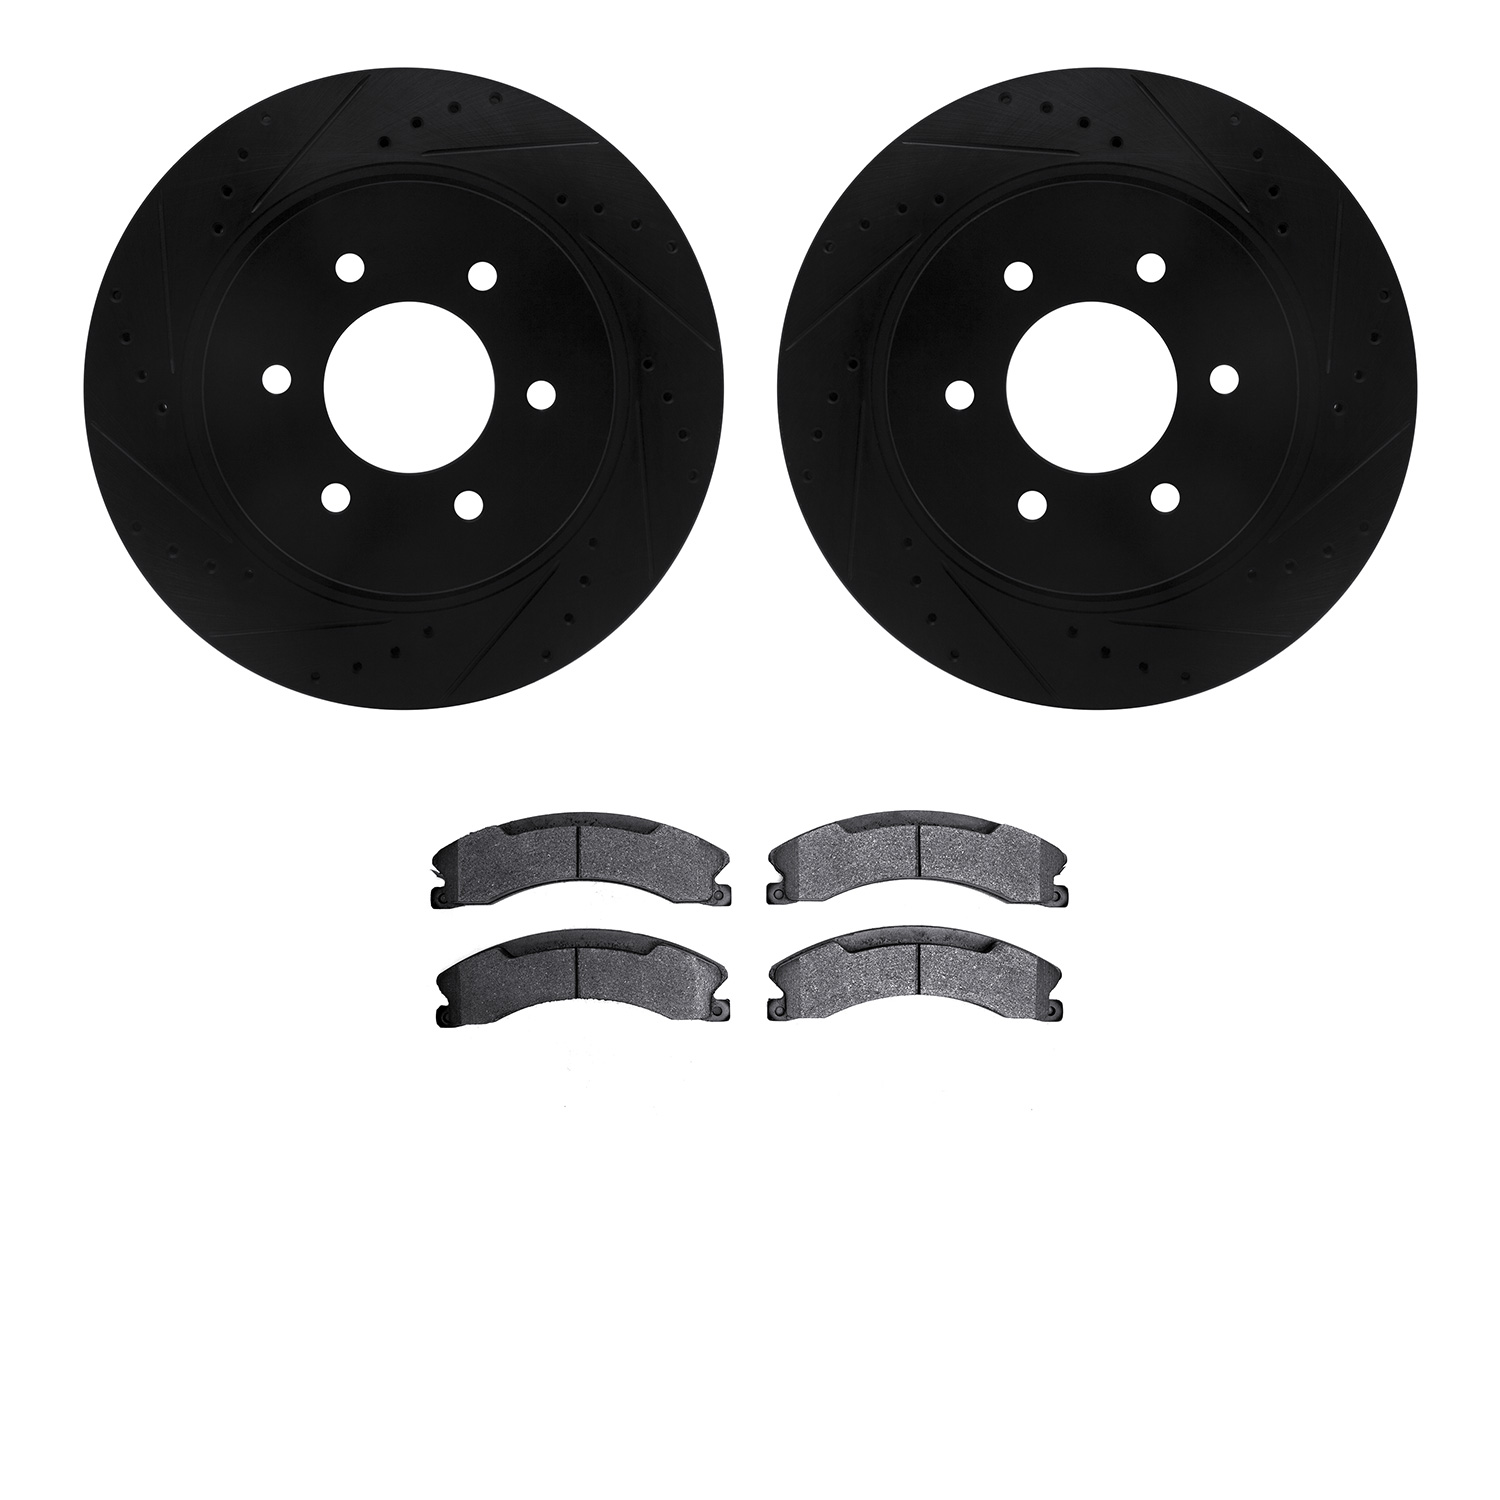 8302-67121 Drilled/Slotted Brake Rotors with 3000-Series Ceramic Brake Pads Kit [Black], Fits Select Infiniti/Nissan, Position: